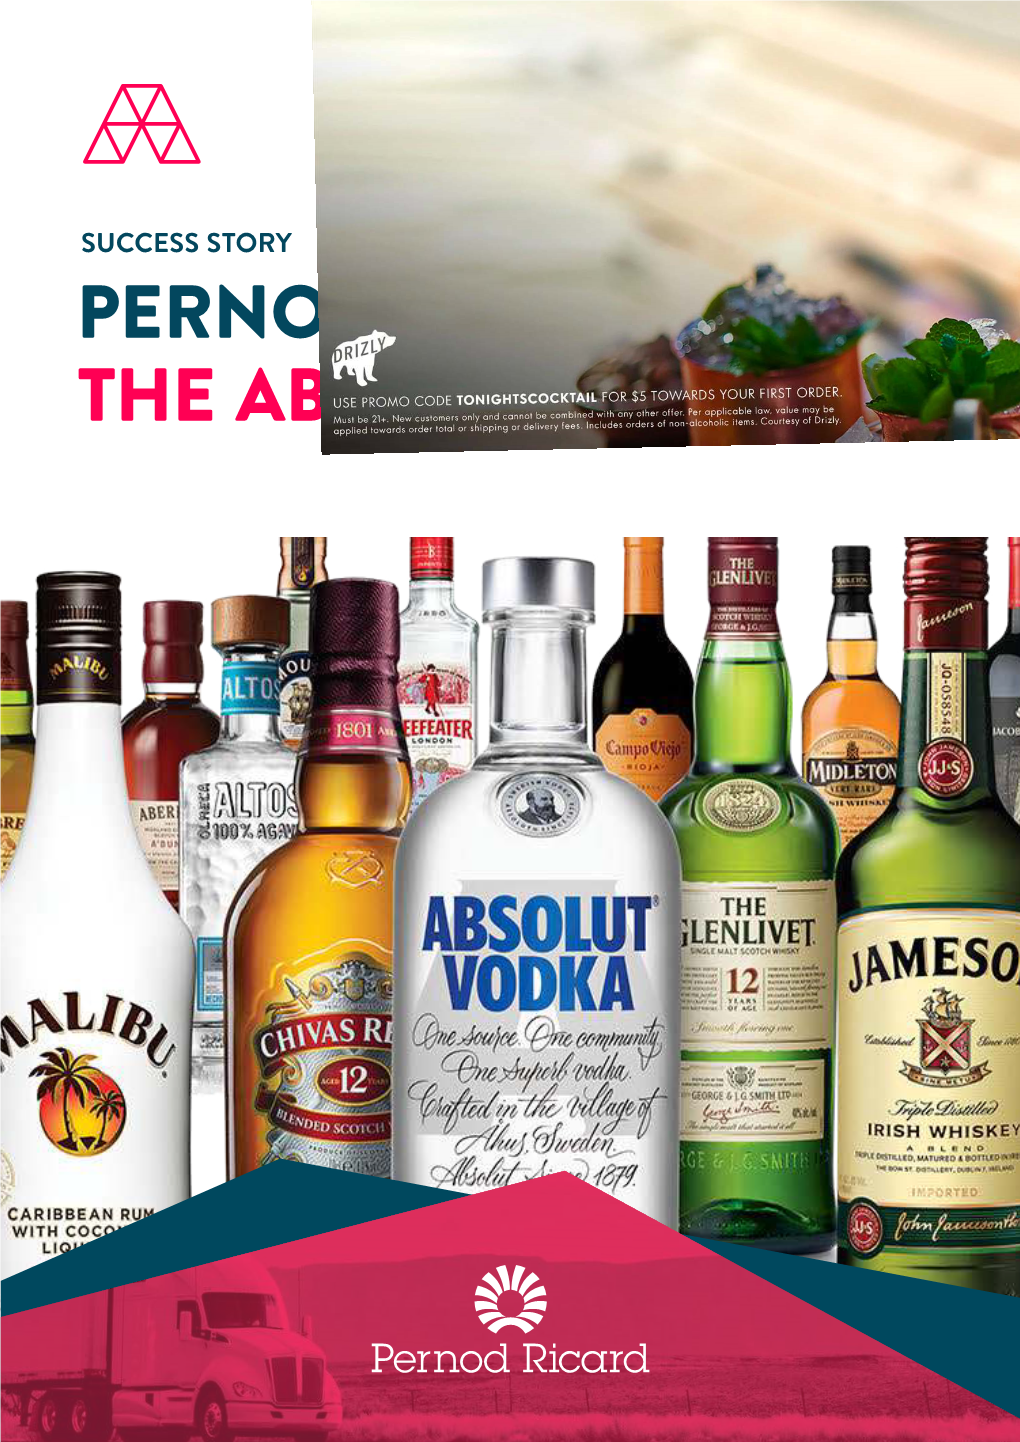 Pernod Ricard / the Absolut Company